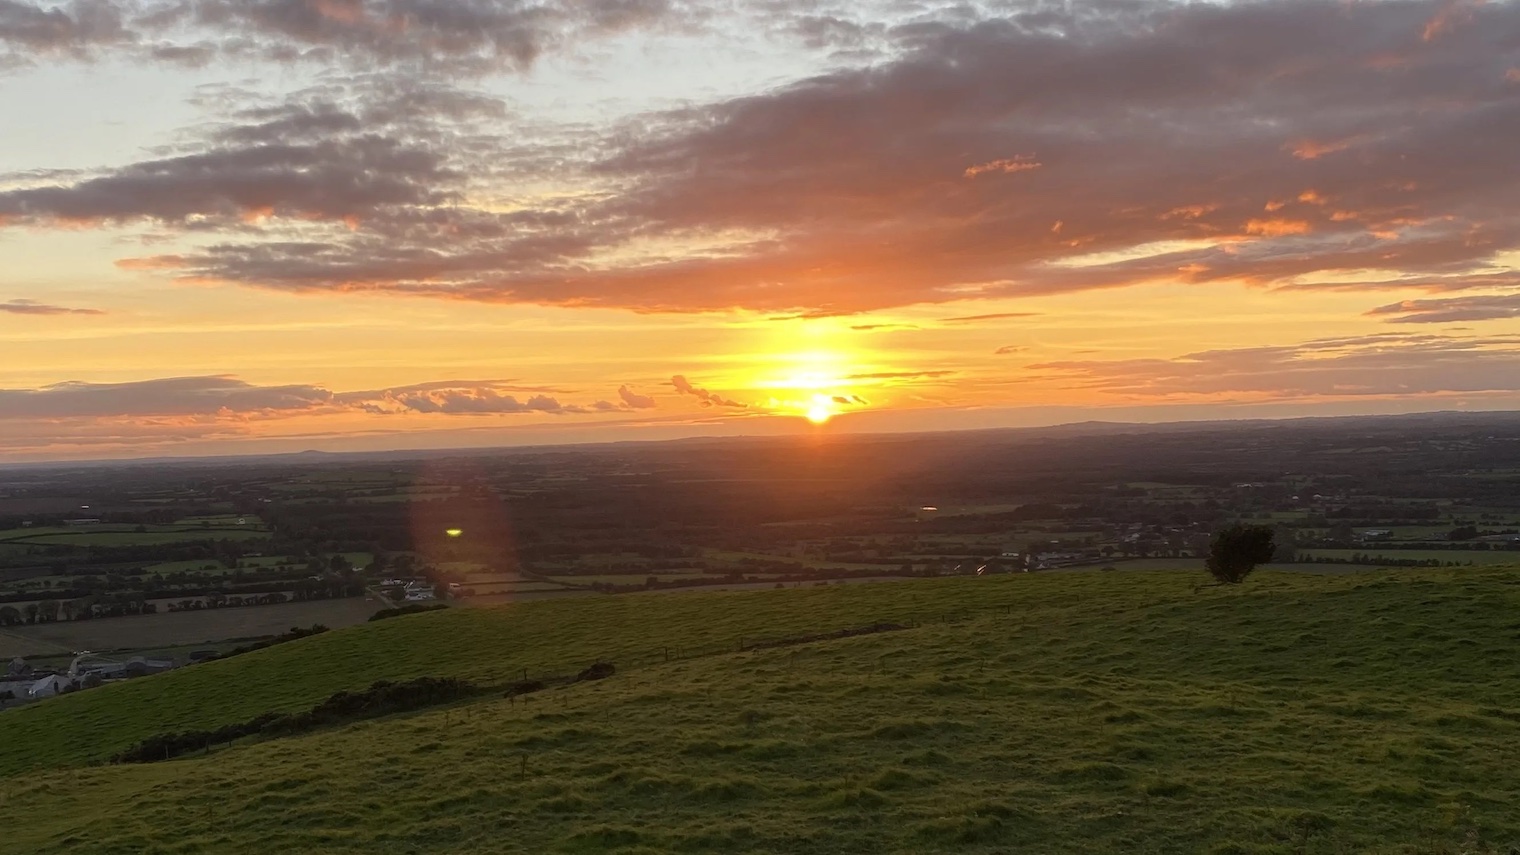 Croghan Hill - Things to do near Tullamore